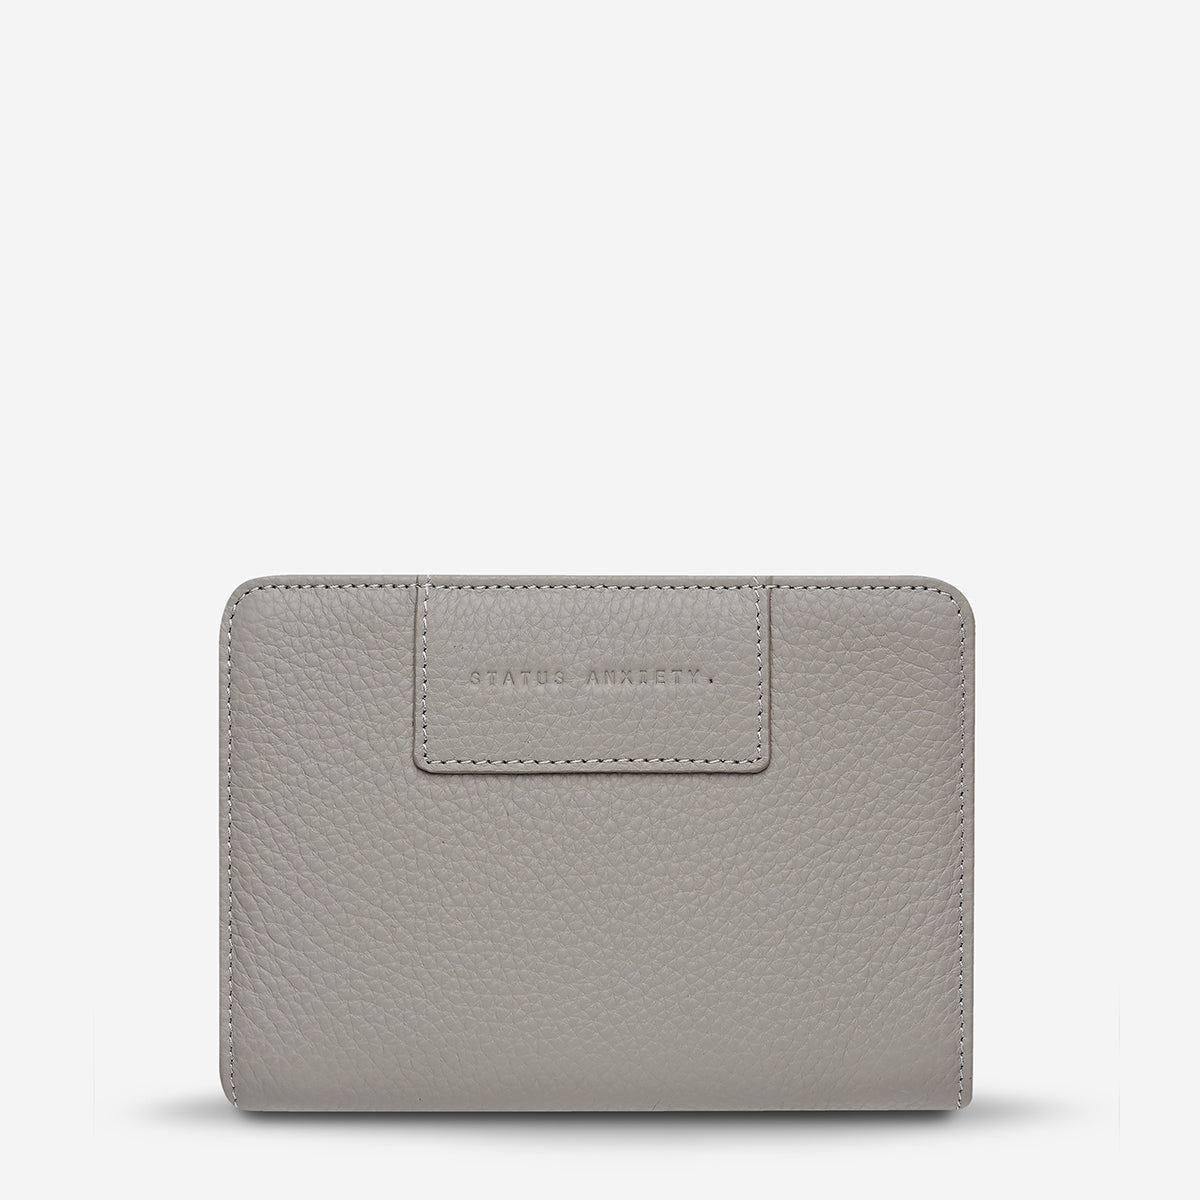 Status Anxiety Popular Problems Women's Leather Wallet Light Grey